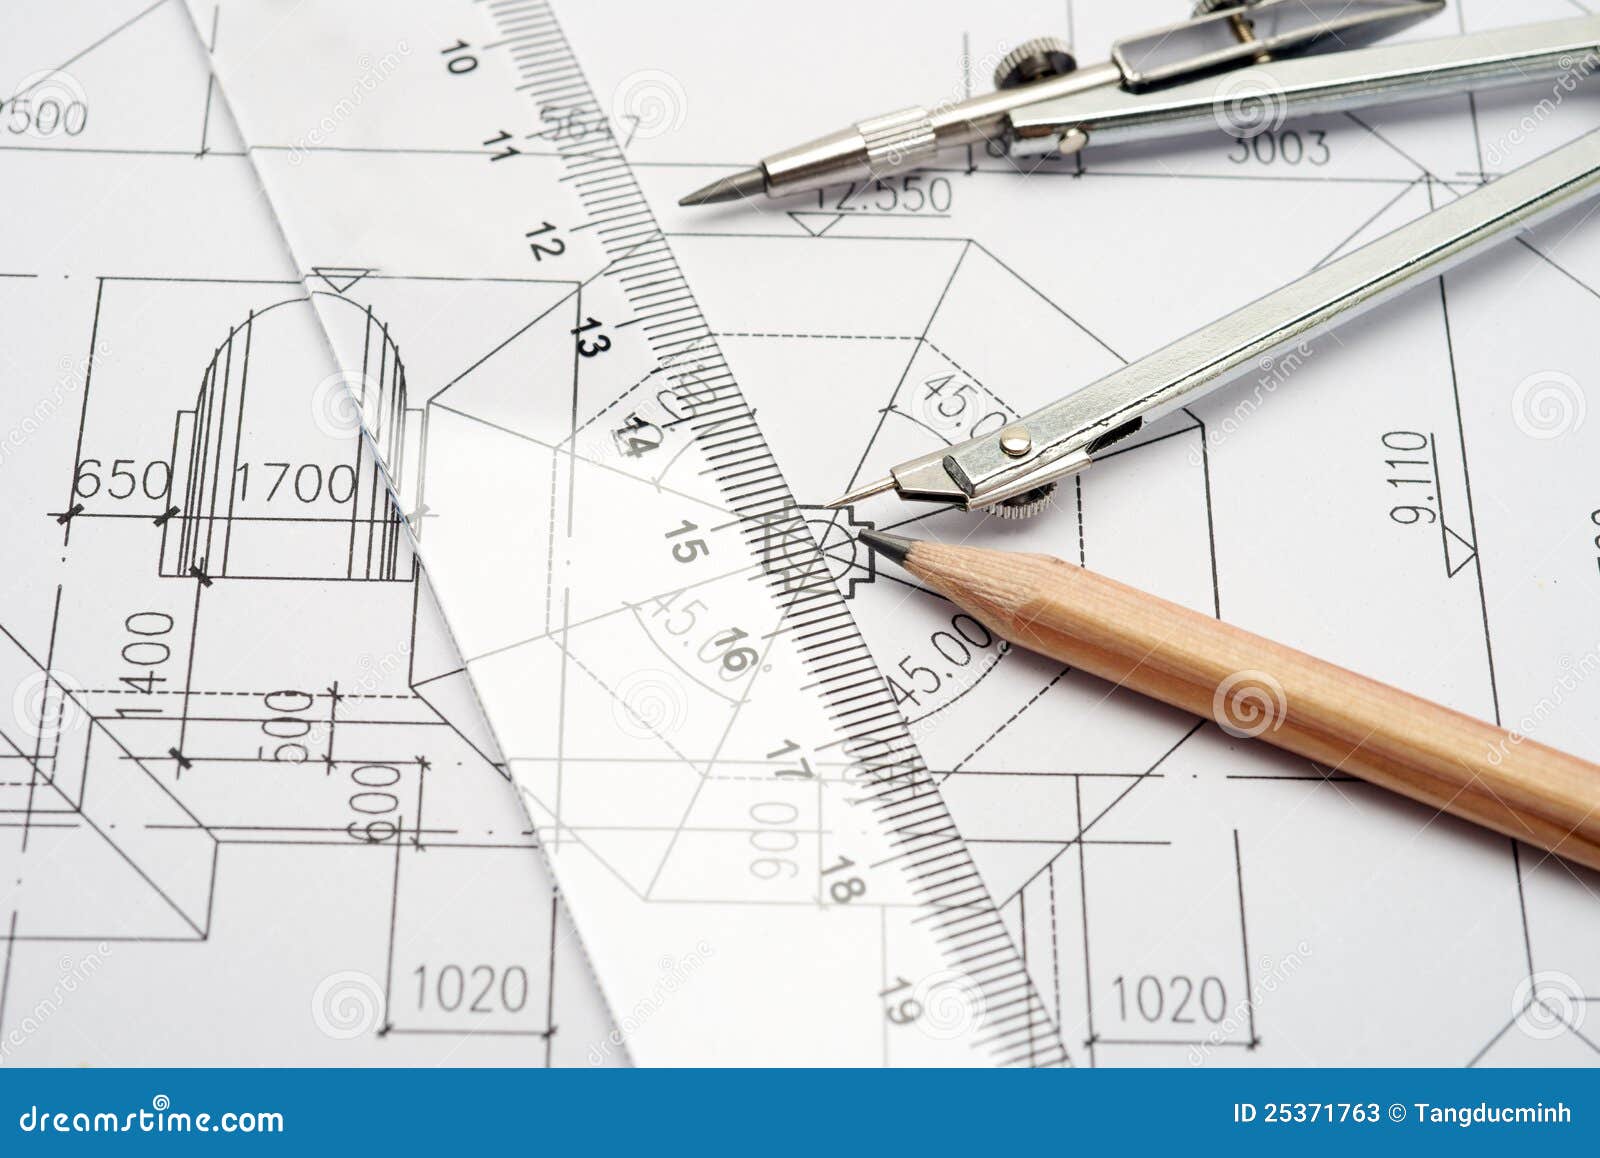 Engineering Design And Drawing Tools Stock Photos - Image: 25371763